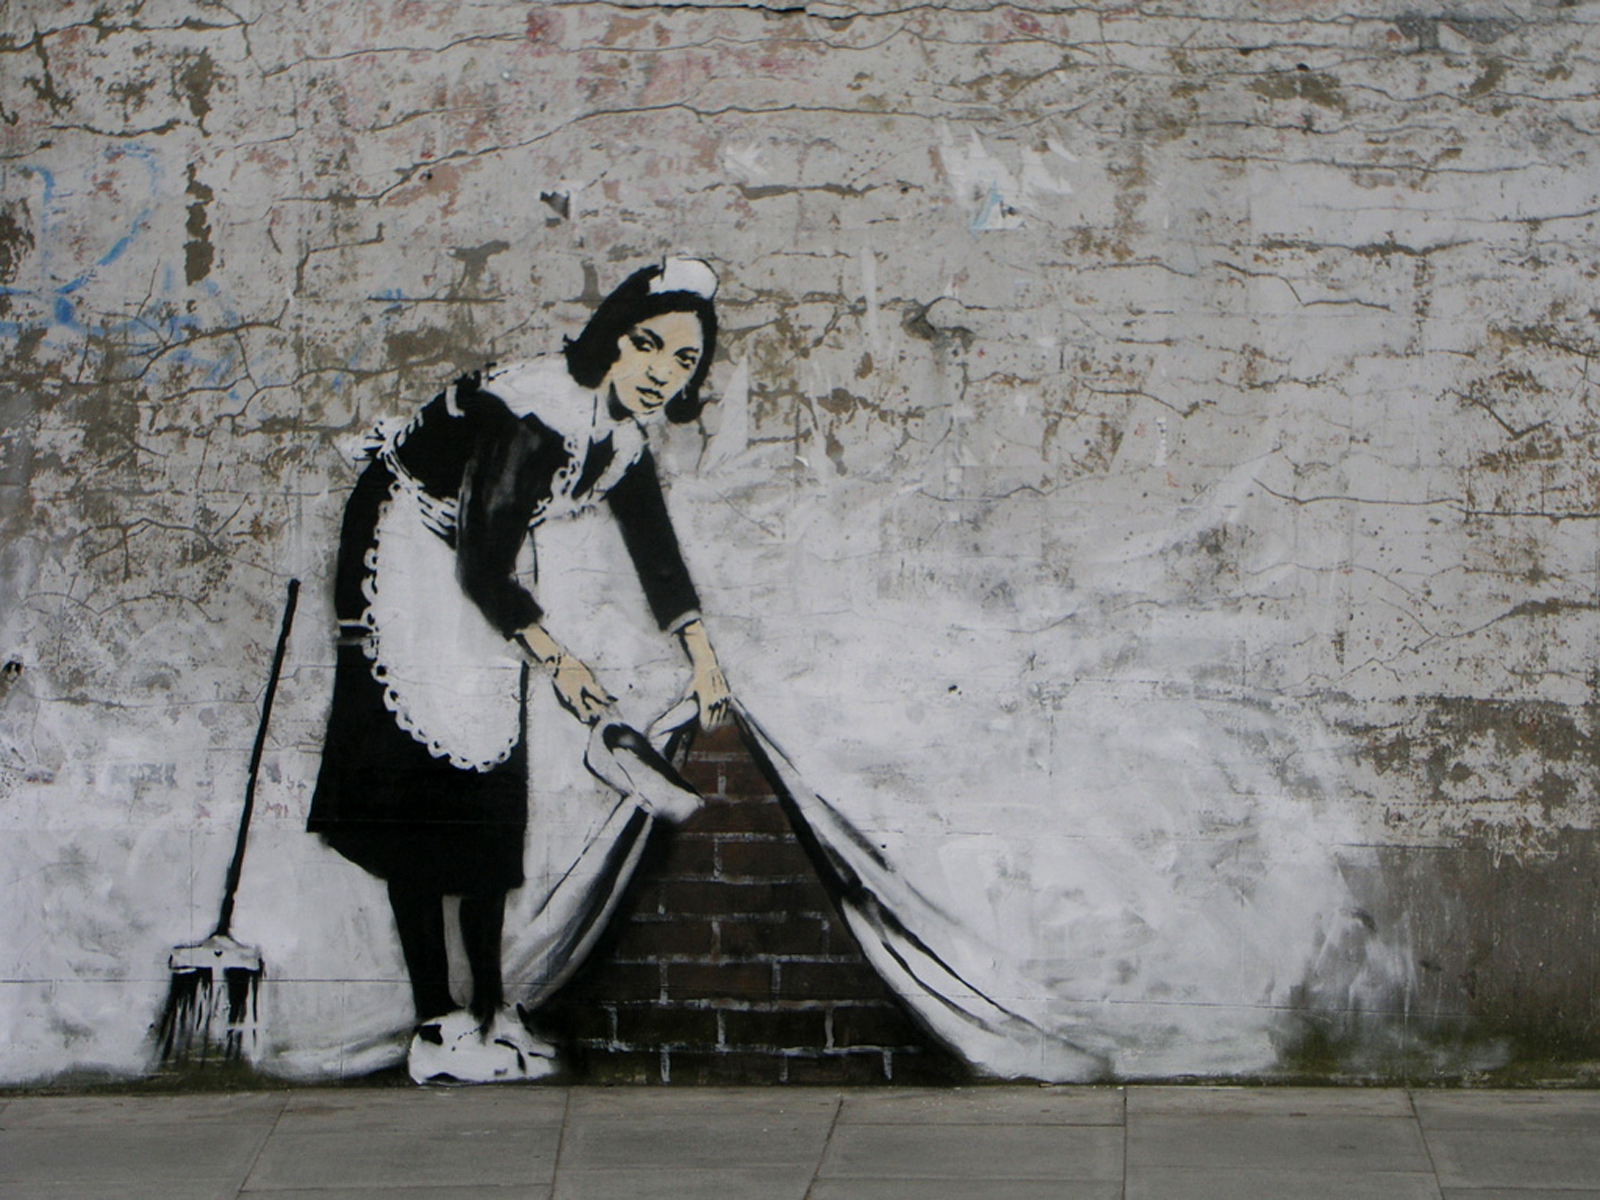 Stylish maid holding a broom, artwork by Banksy.